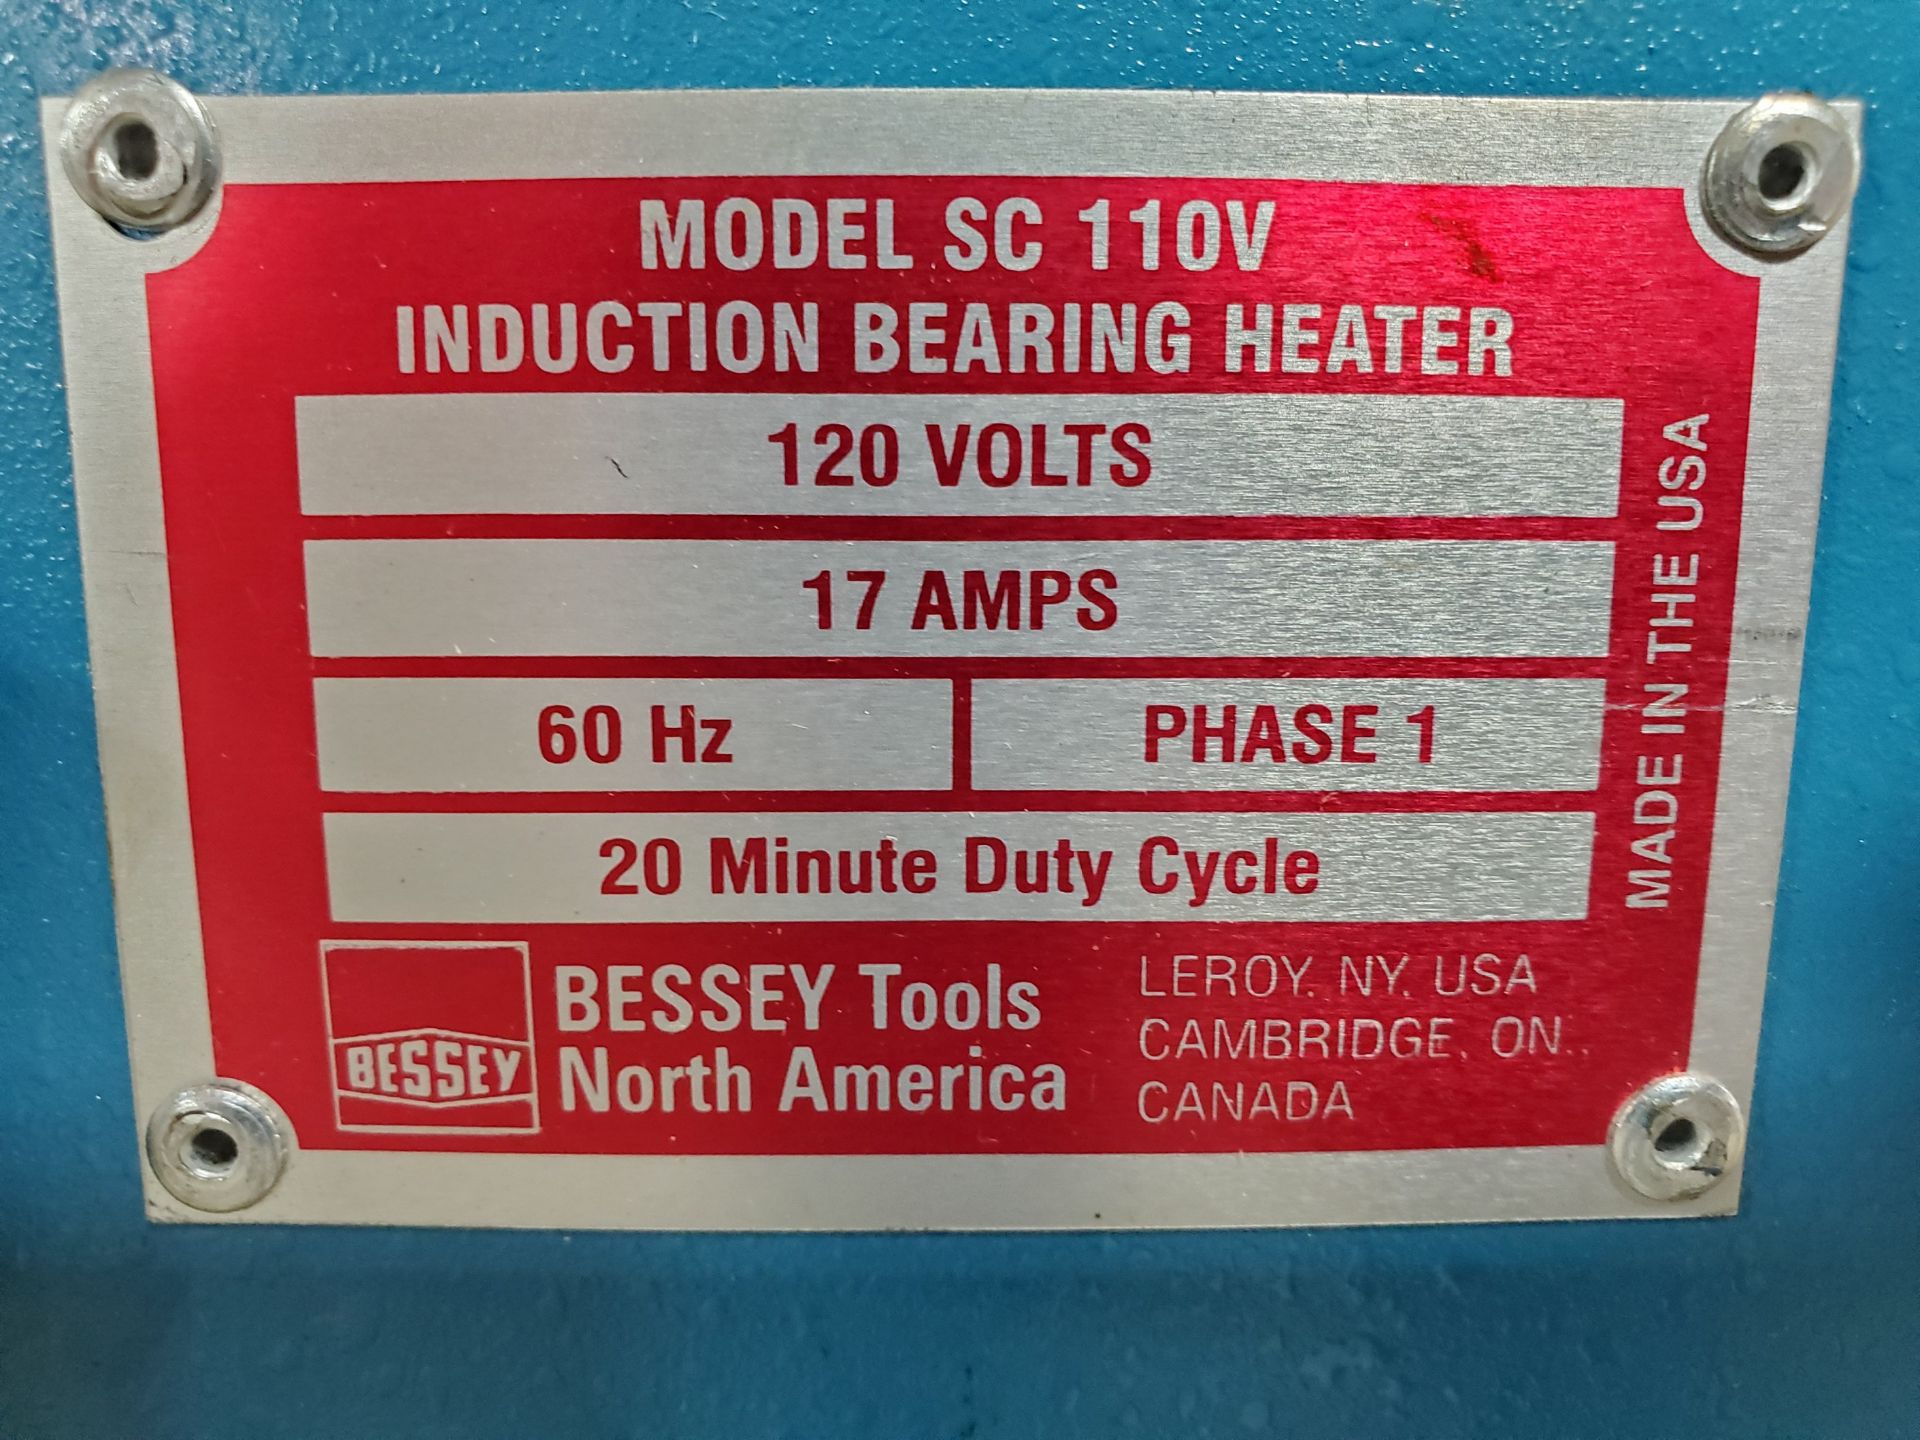 BESSEY TOOL INDUCTION BEARING HEATER, MODEL SC 110V, 20 MINUTE DUTY CYCLE, 17 AMP, SINGLE PHASE - Image 4 of 5